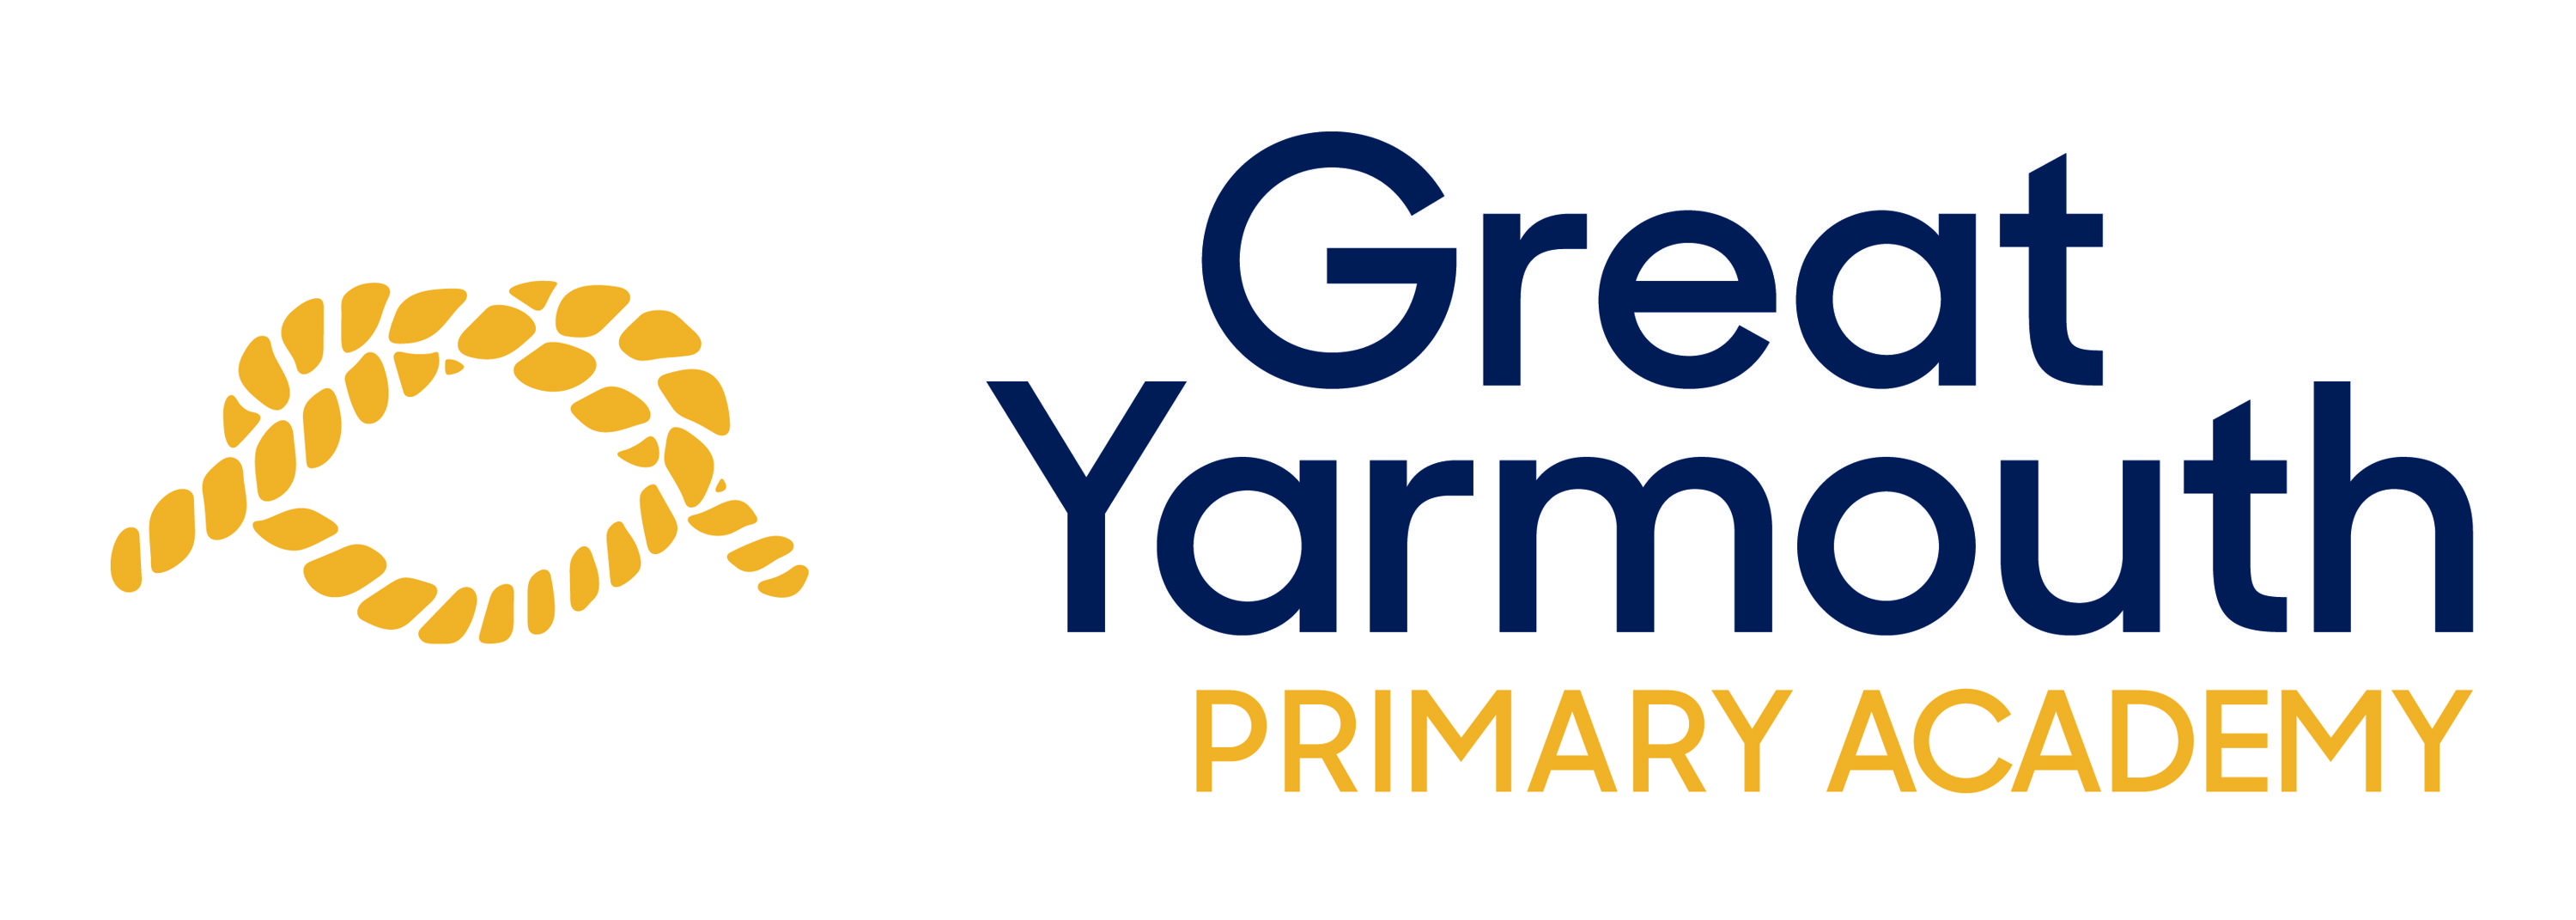 Great Yarmouth Primary Academy